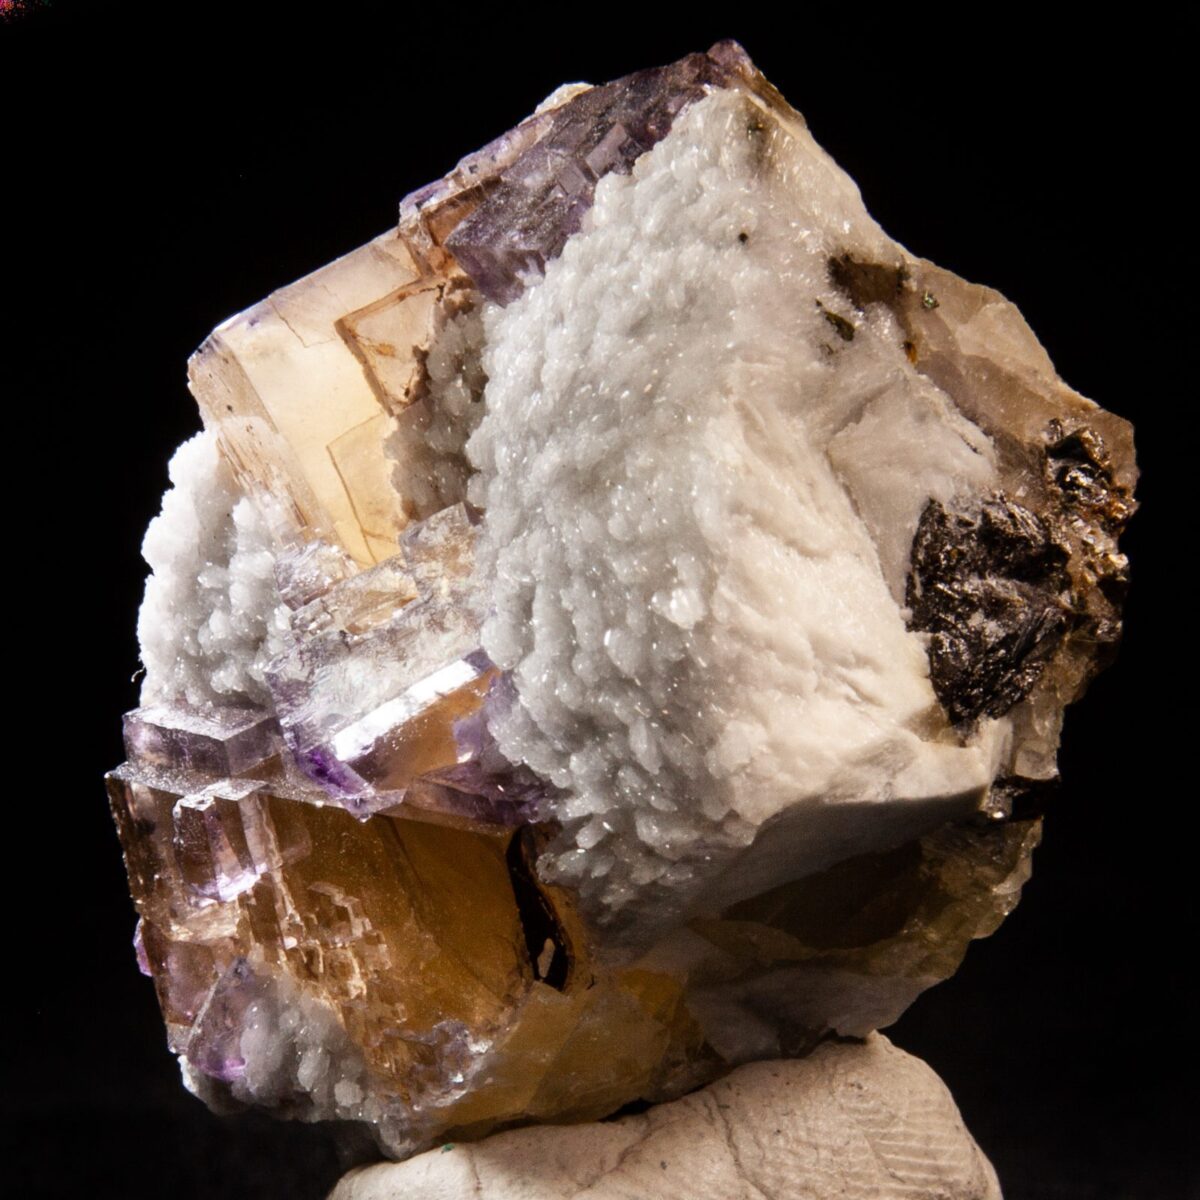 Fluorite and Baryte